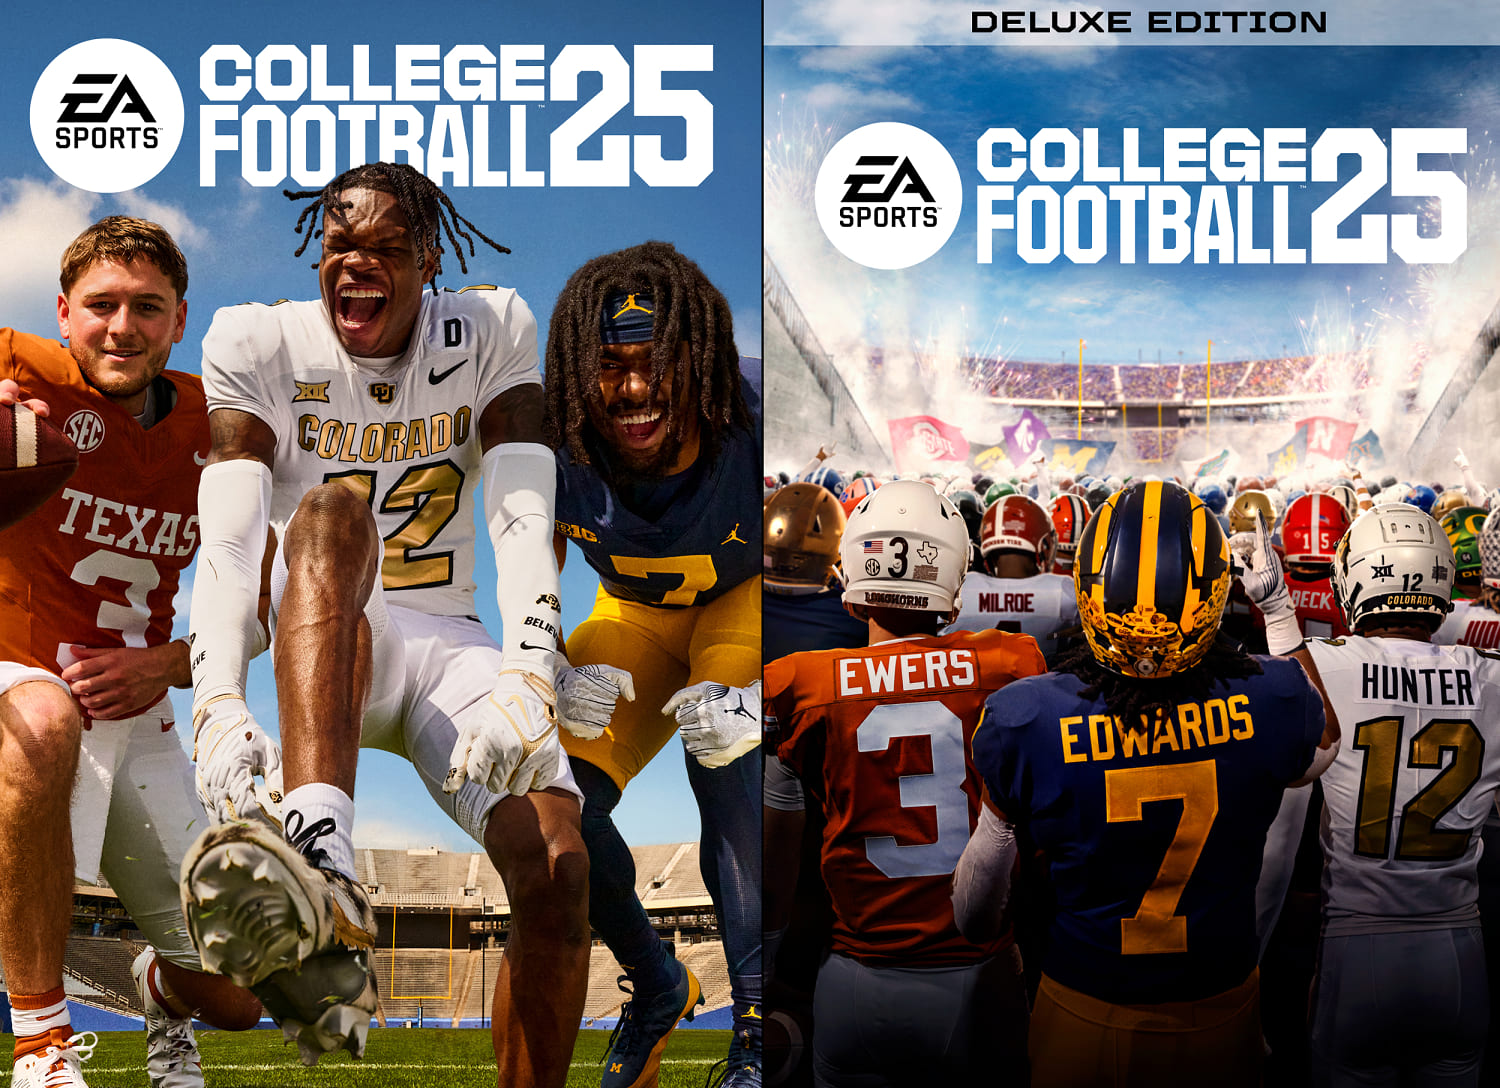 EA Sports: It’s in the (college) game, again